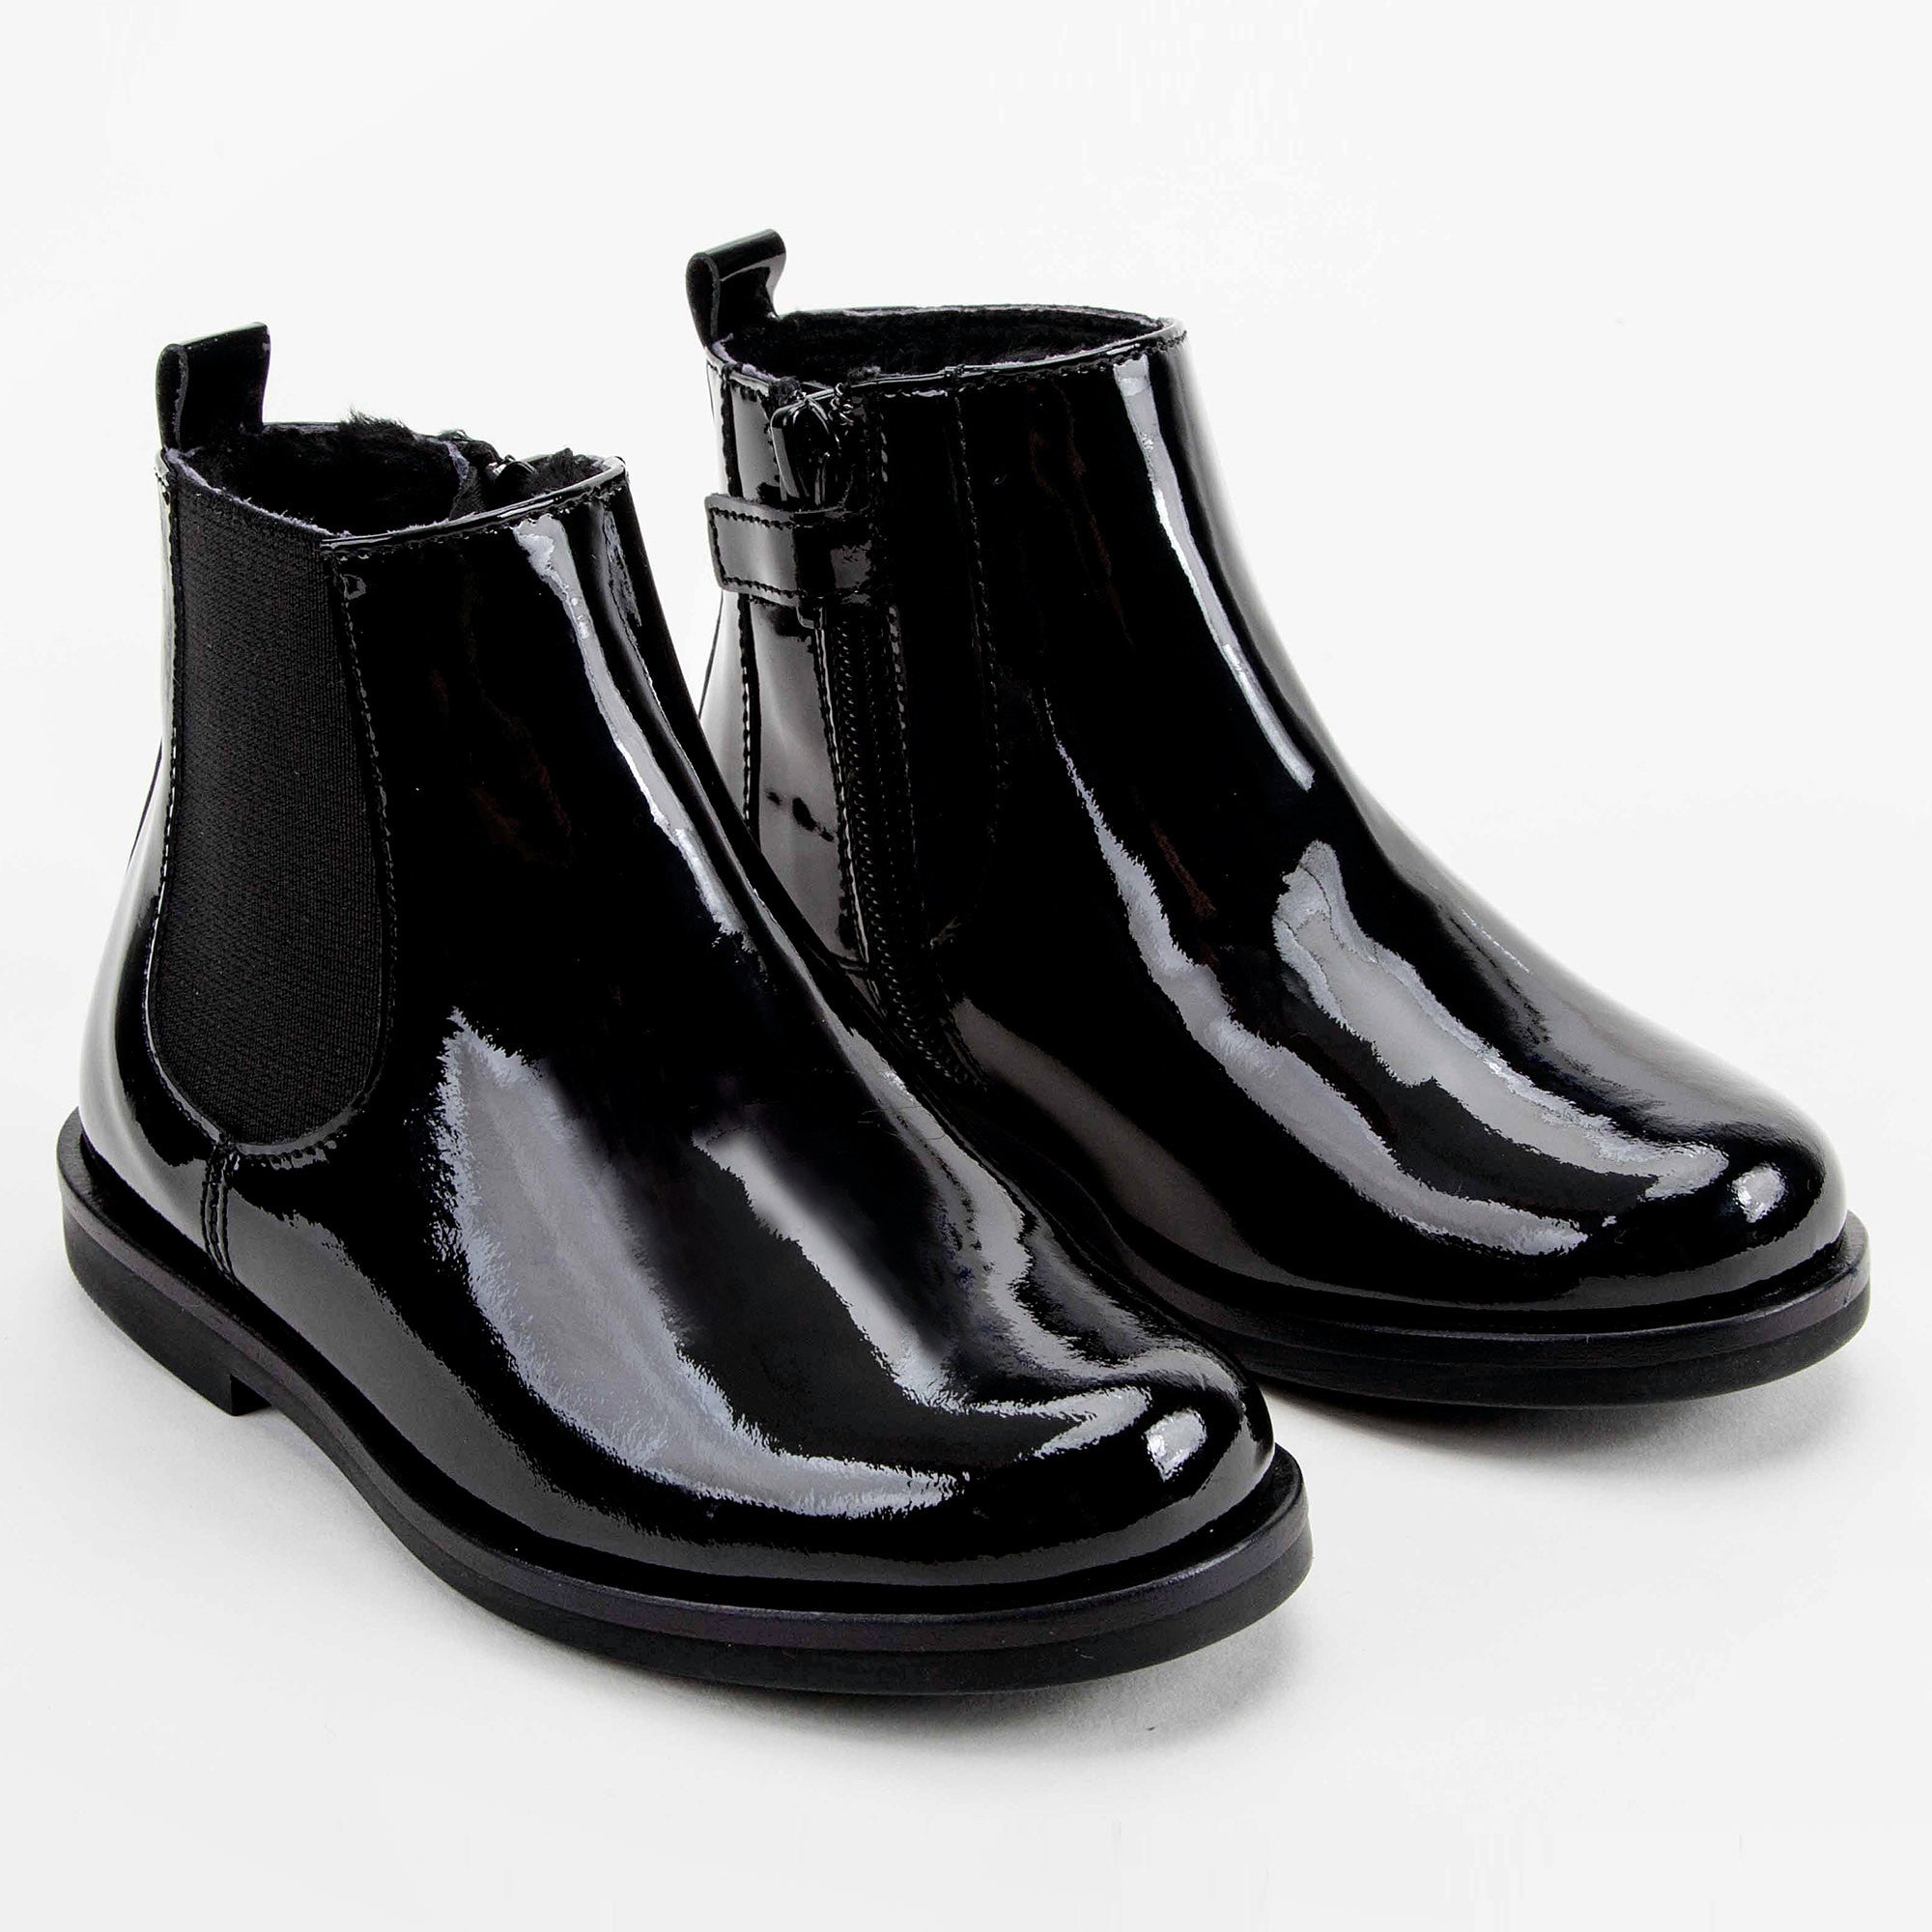 Girls Black Patent Leather Ankle Boots With Wool